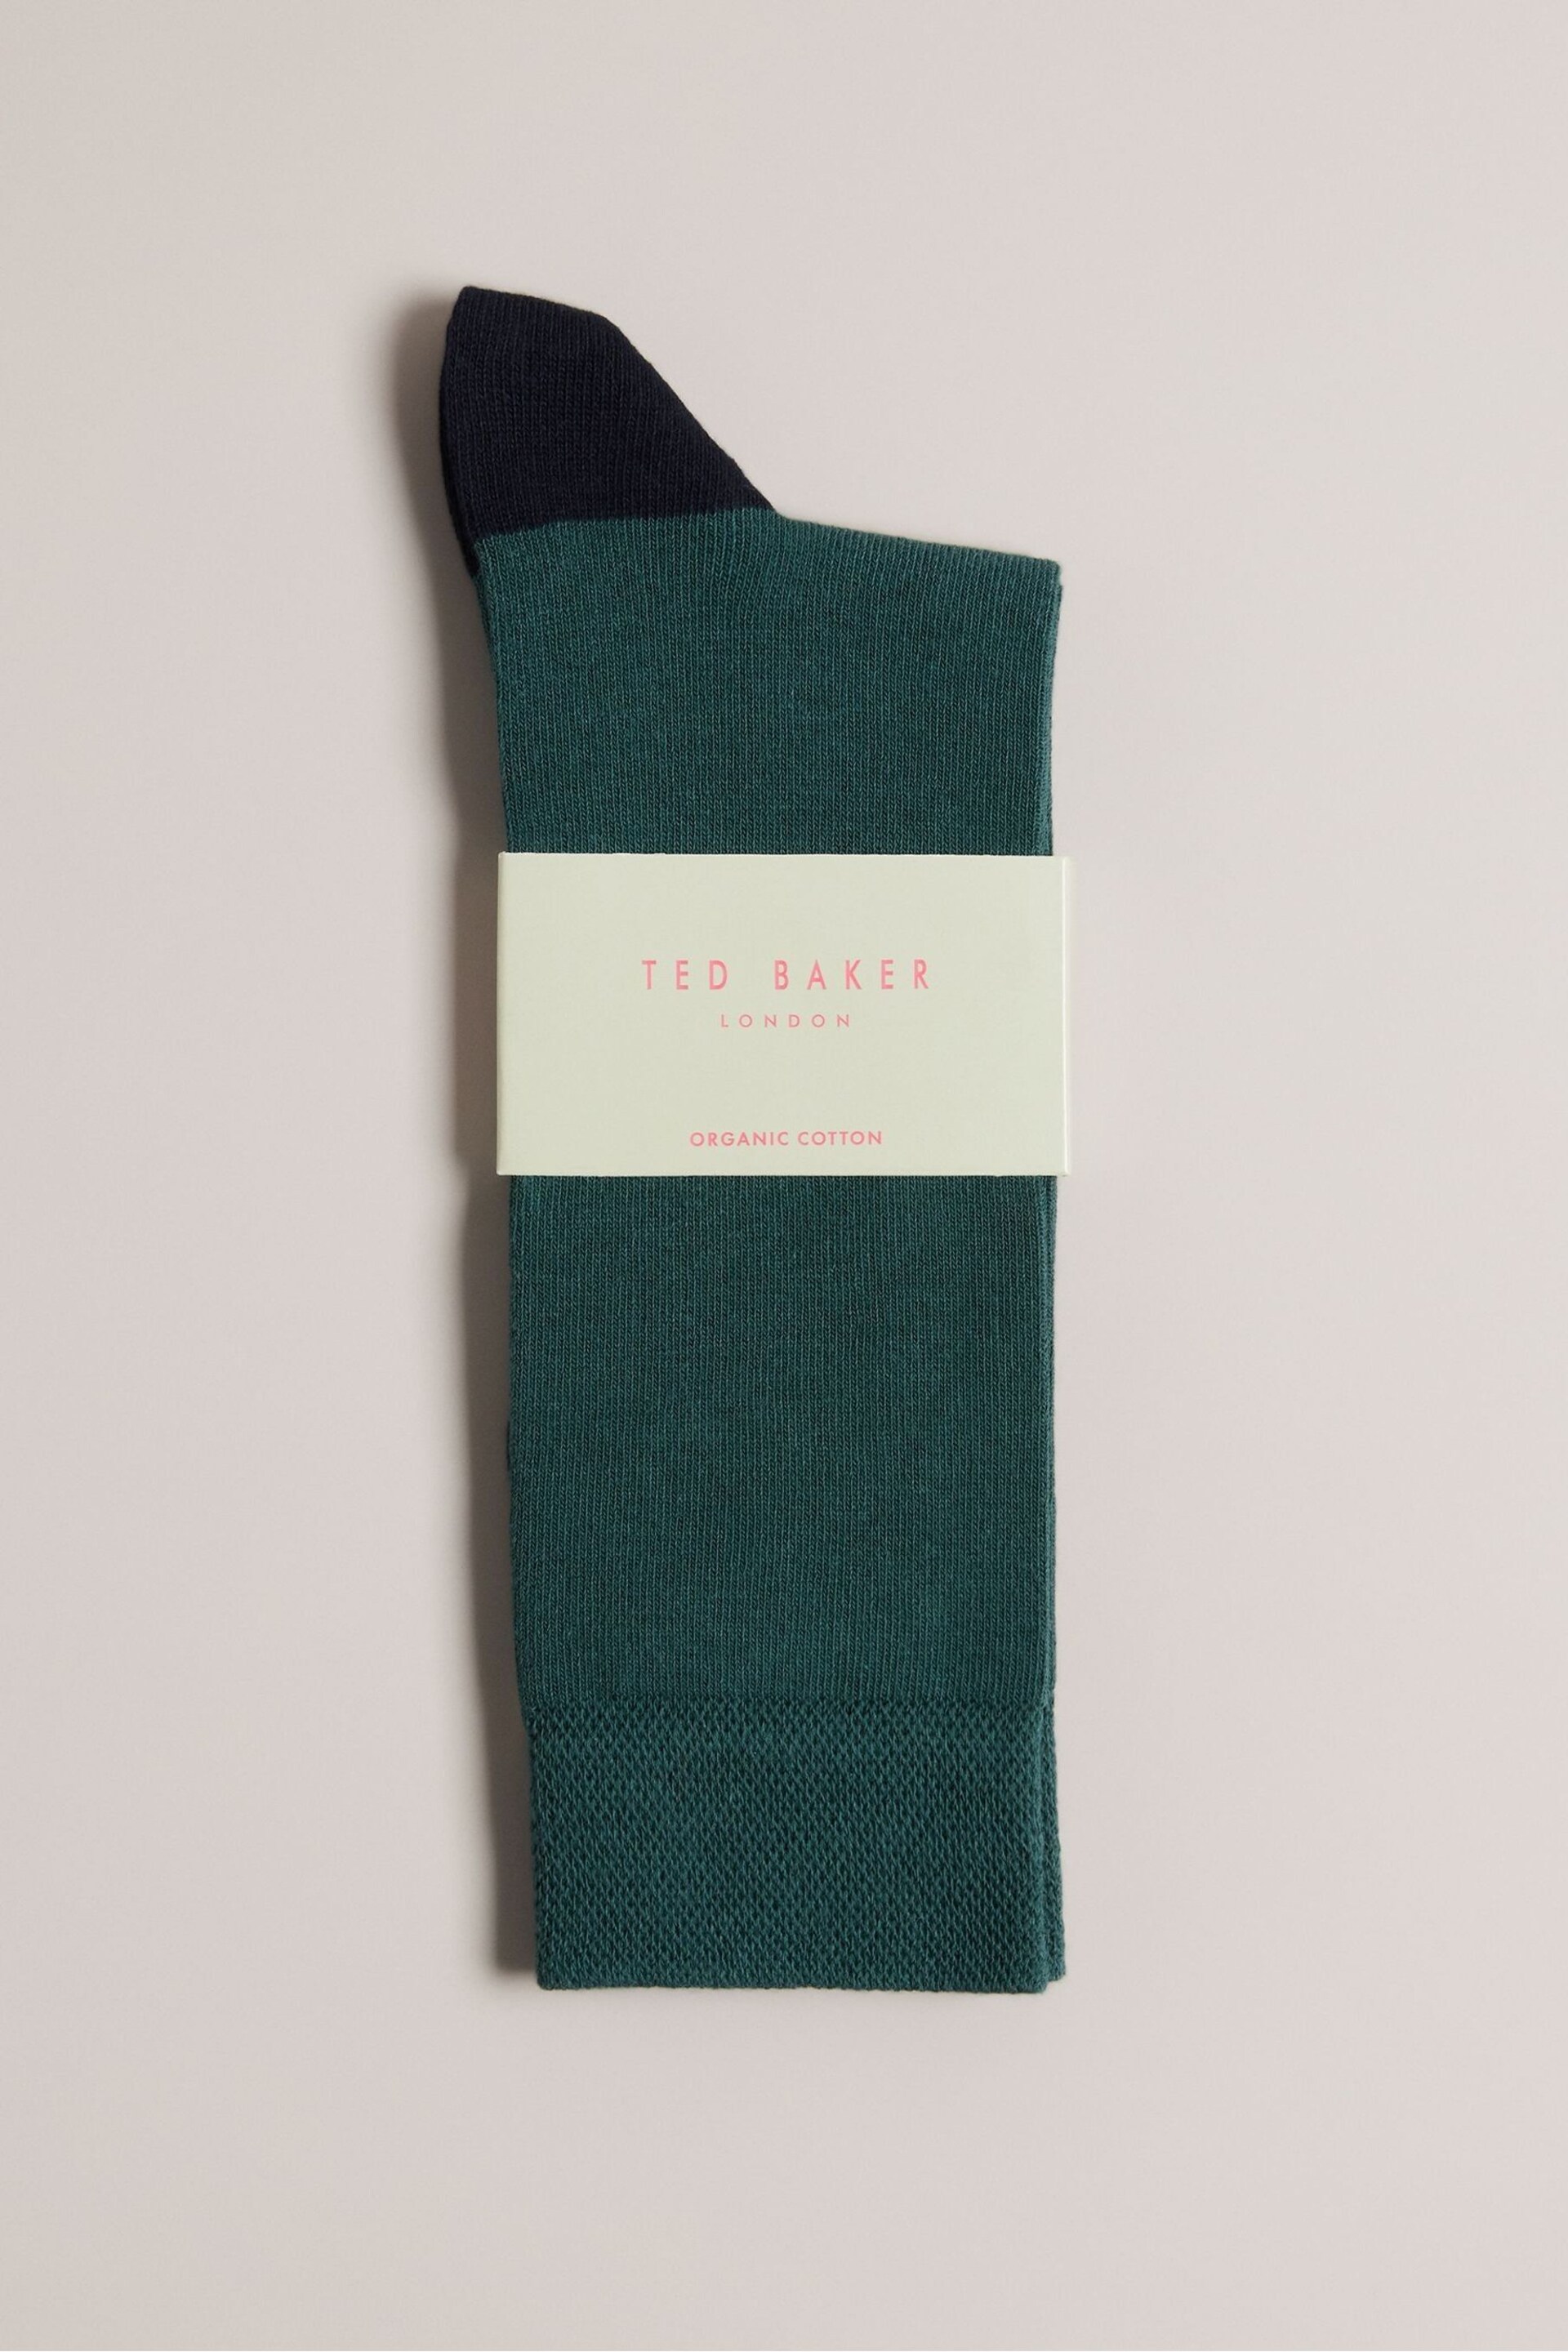 Ted Baker Green Corecol Socks With Contrast Colour Heel And Toe - Image 2 of 3